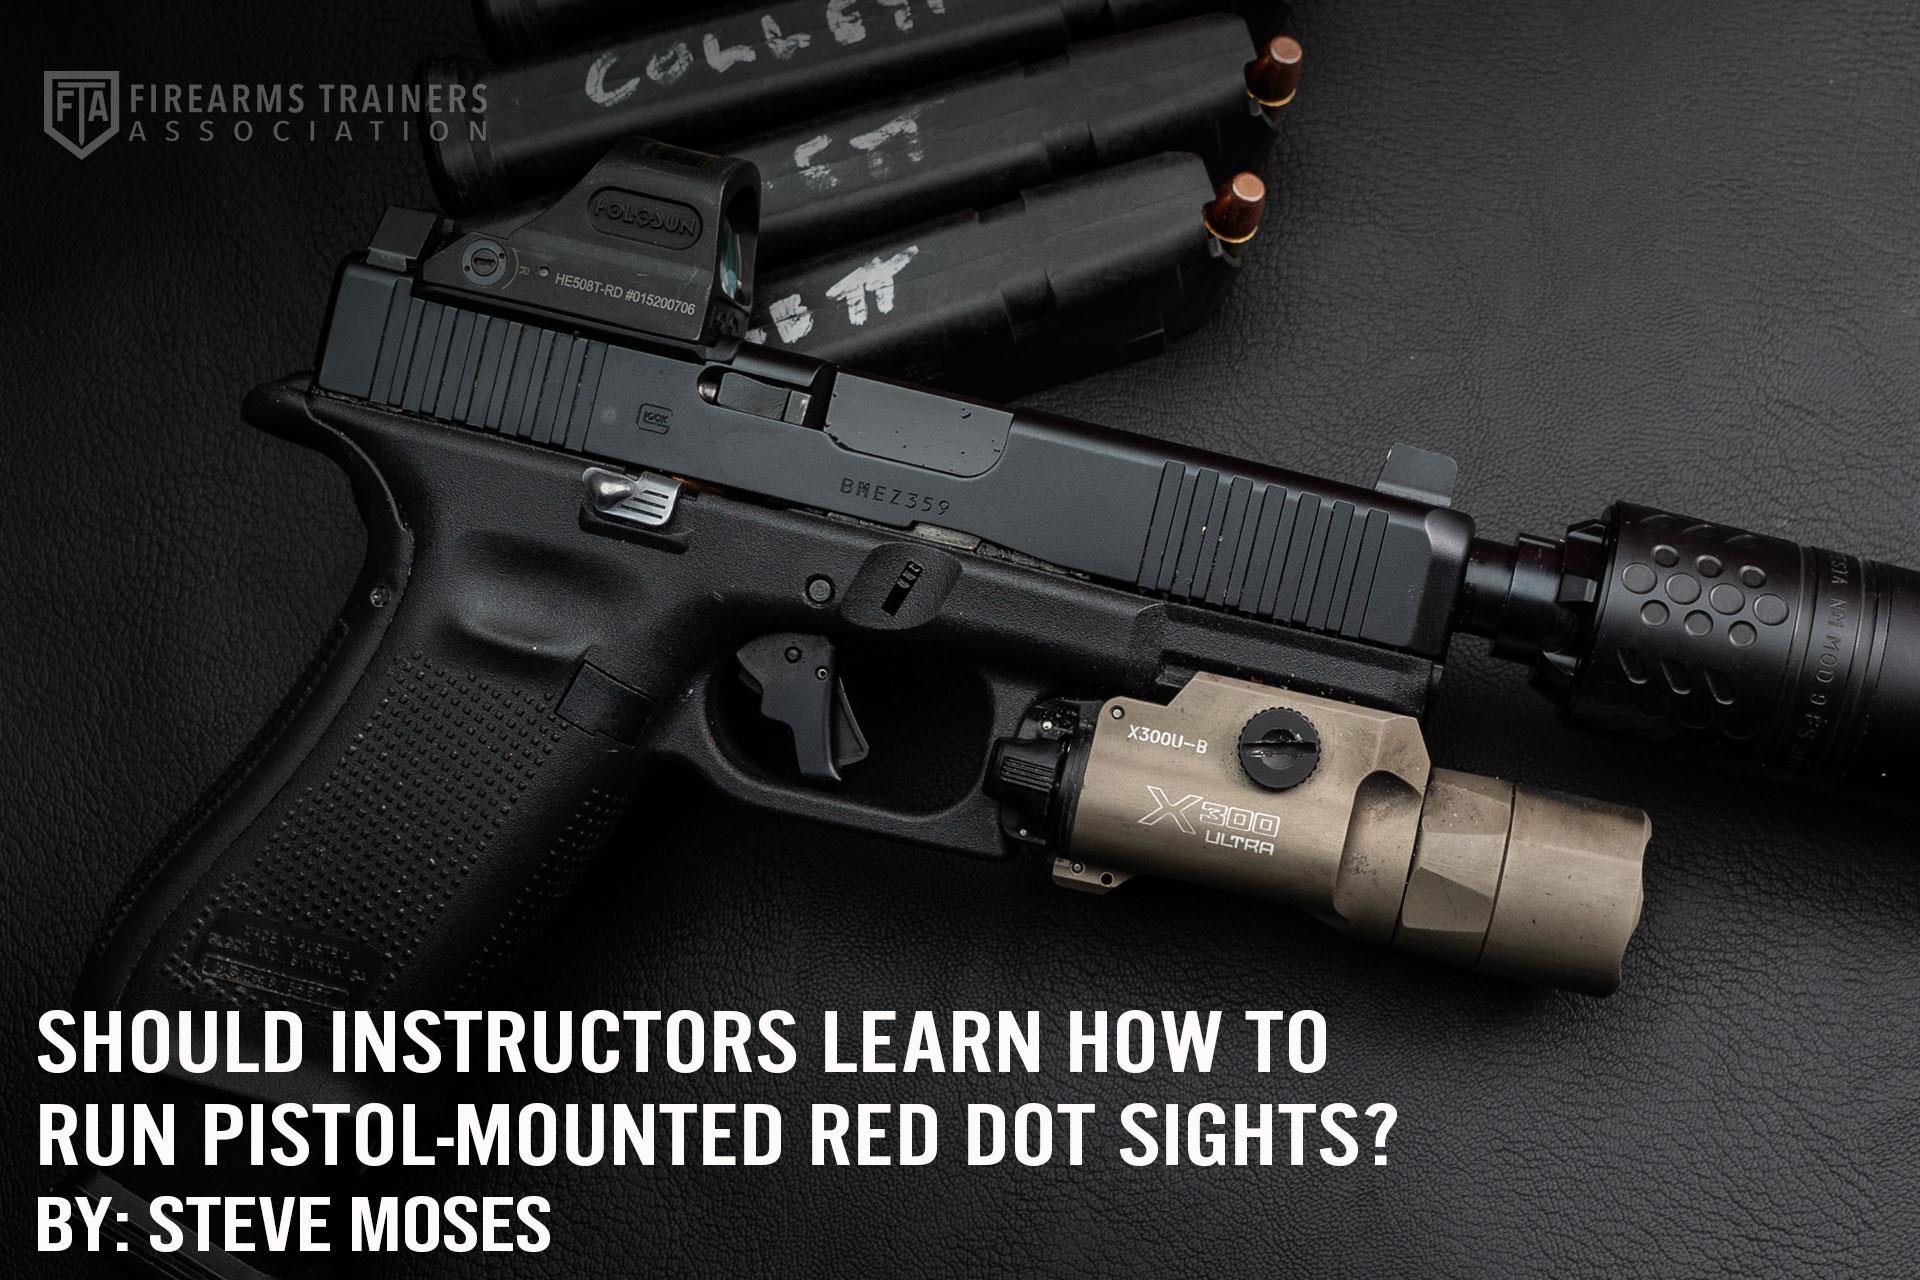 SHOULD INSTRUCTORS LEARN HOW TO RUN PISTOL-MOUNTED RED DOT SIGHTS?